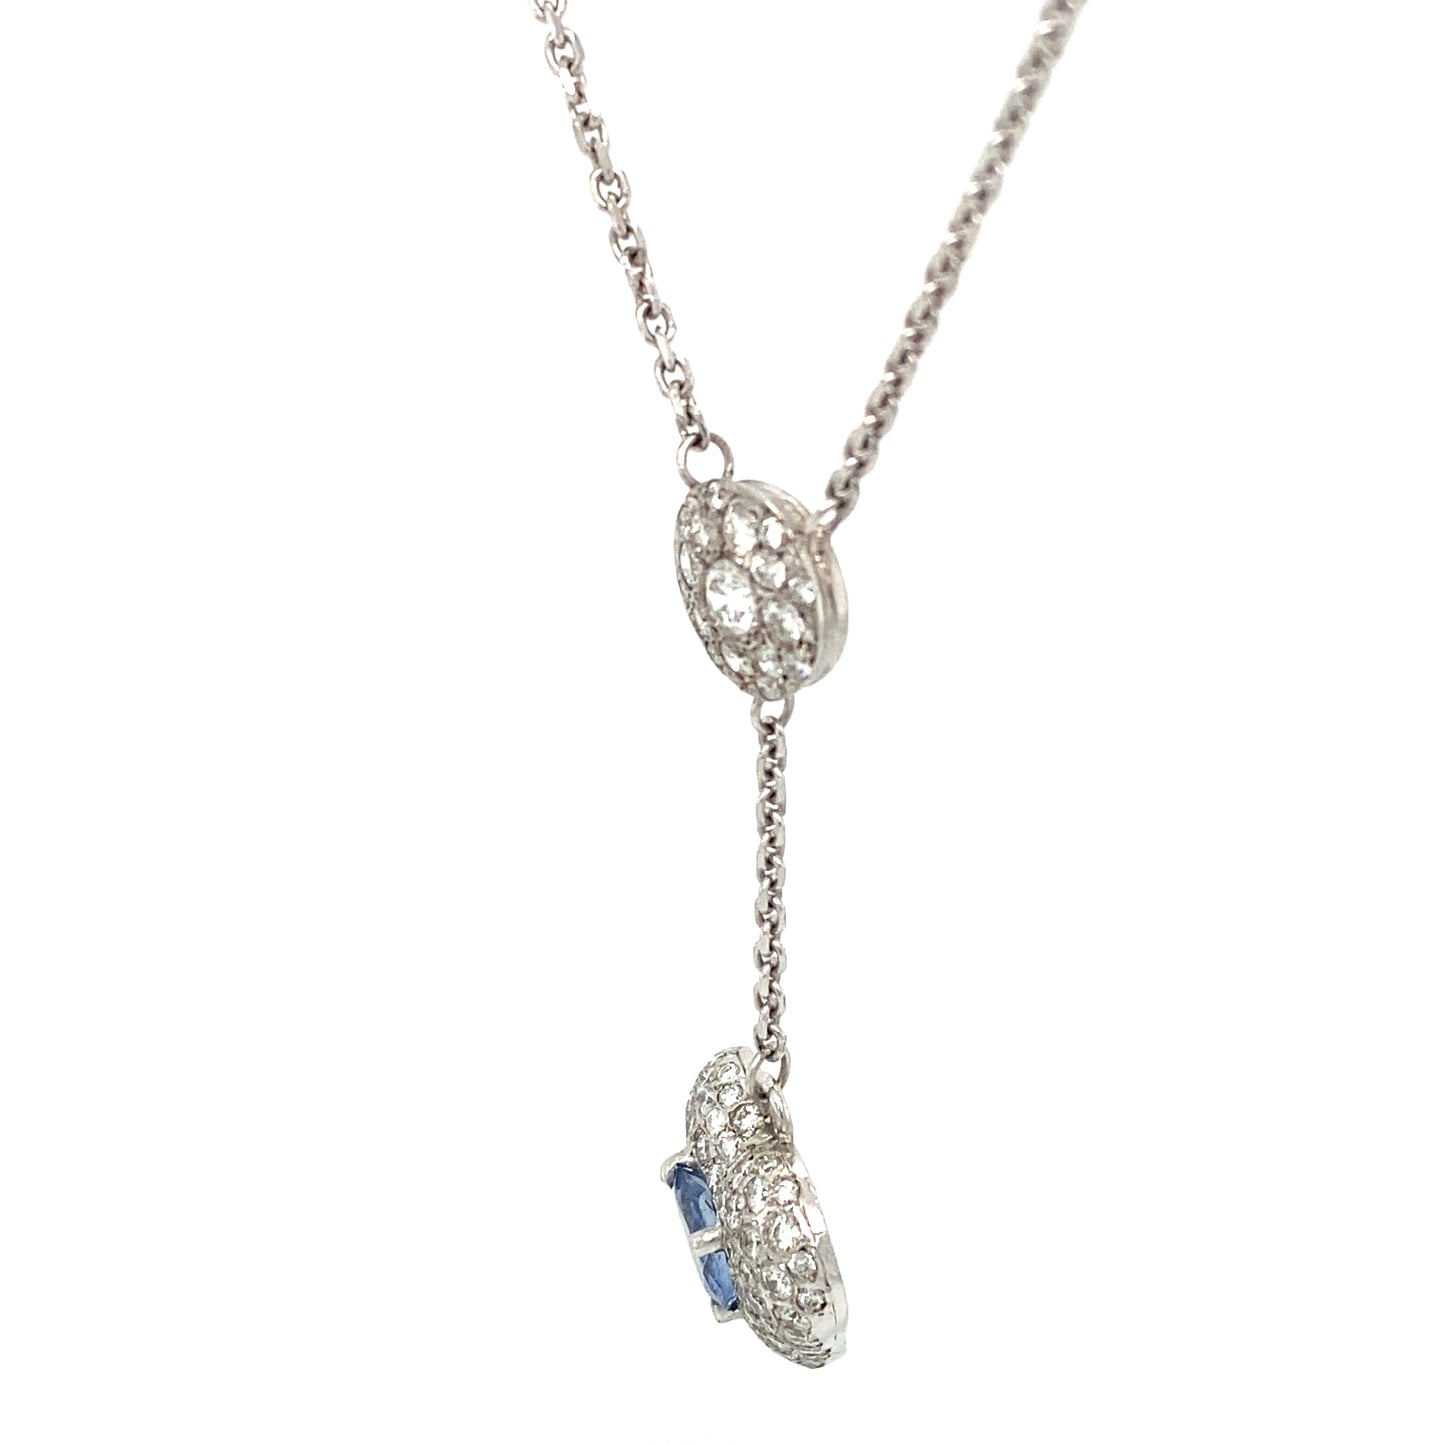 Circa 1980s 1.30ct Heart Cut Sapphire and Diamond Necklace in 14K White Gold